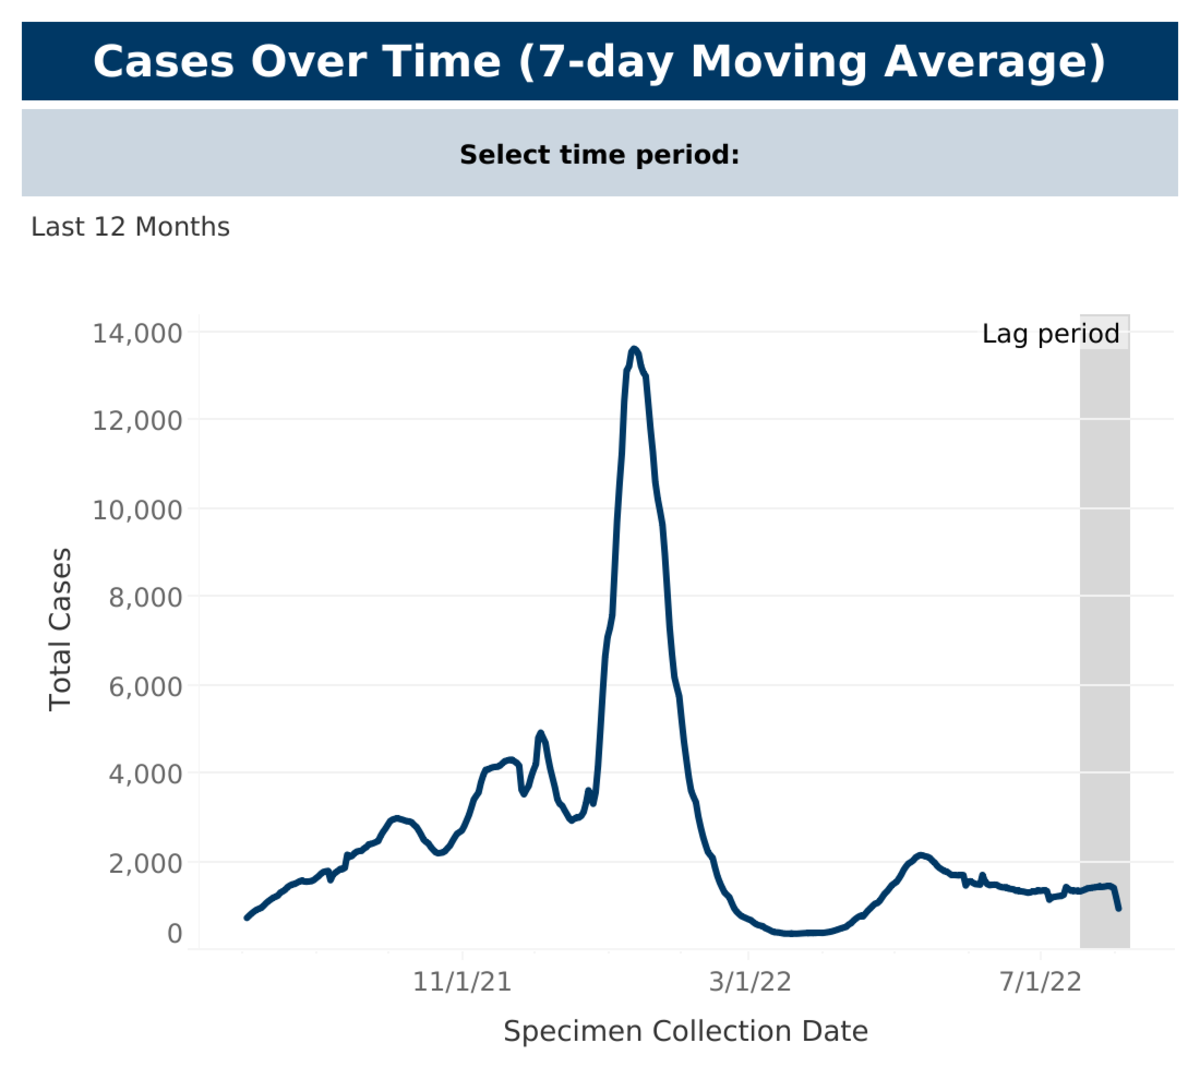 Case 7-day Moving Average Dashboard (2)